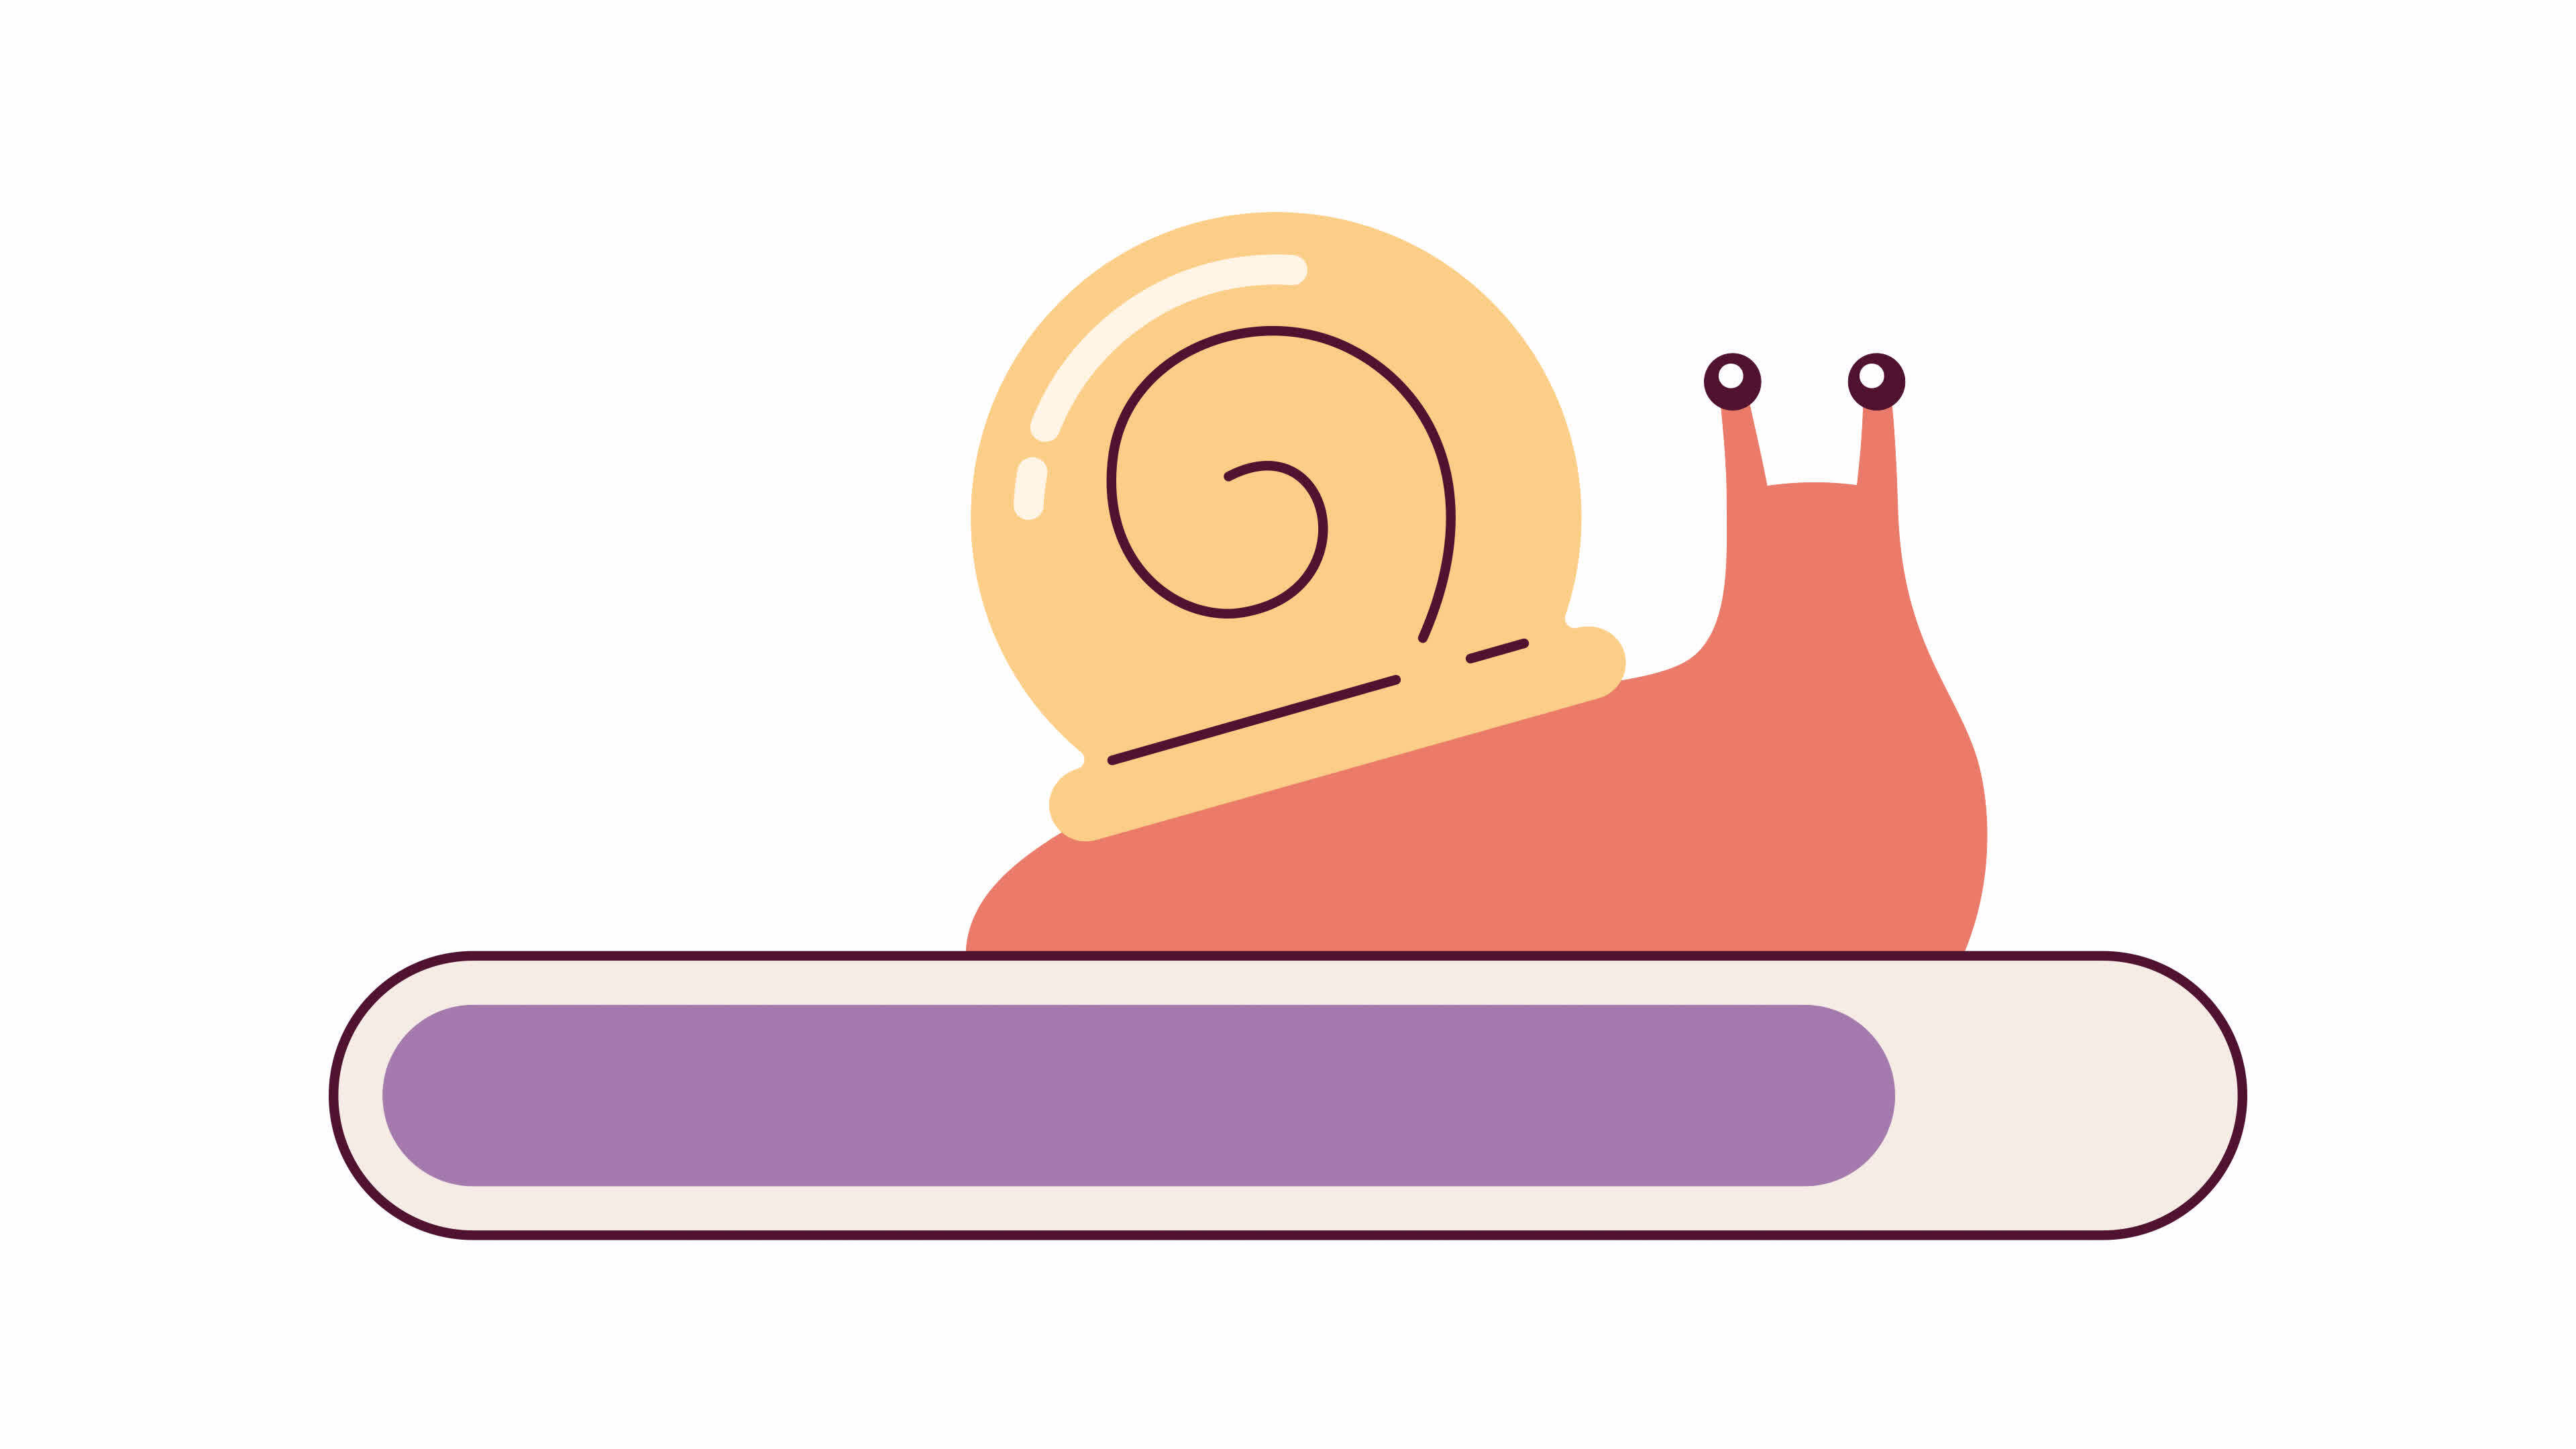 Cartoon Snail Loading Loading Gif Animation PNG Images, PSD Free Download  - Pikbest